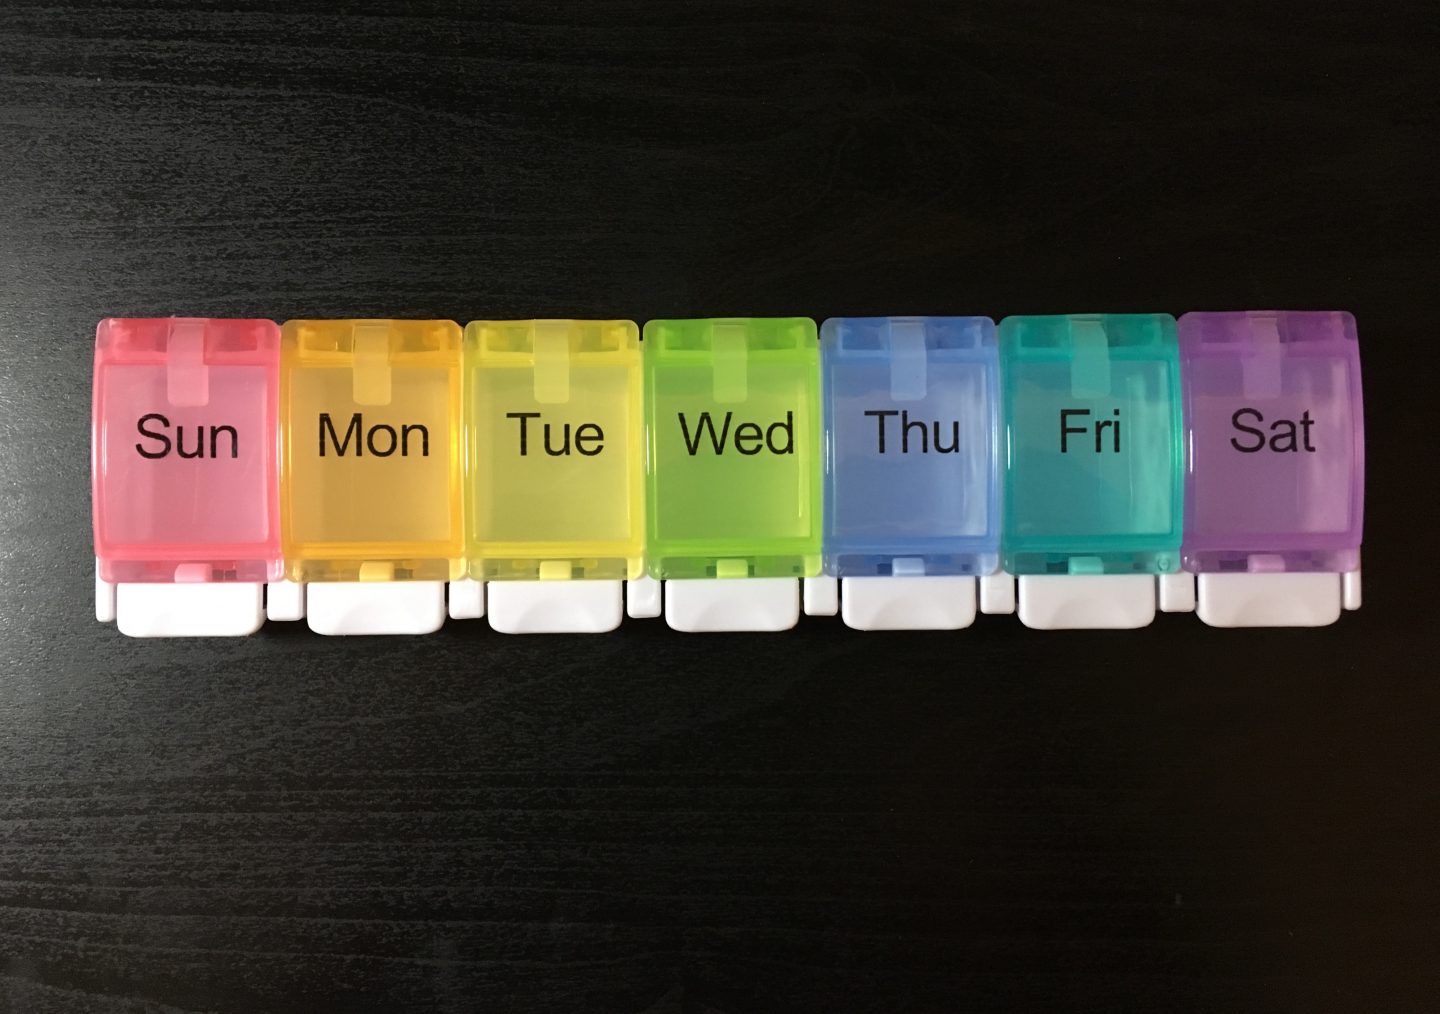 The Auvon pill box on my black desk. It has 7 compartments with a day of the week written on each. It's a long rectangle in white, and the lids for each day are in a different colour.